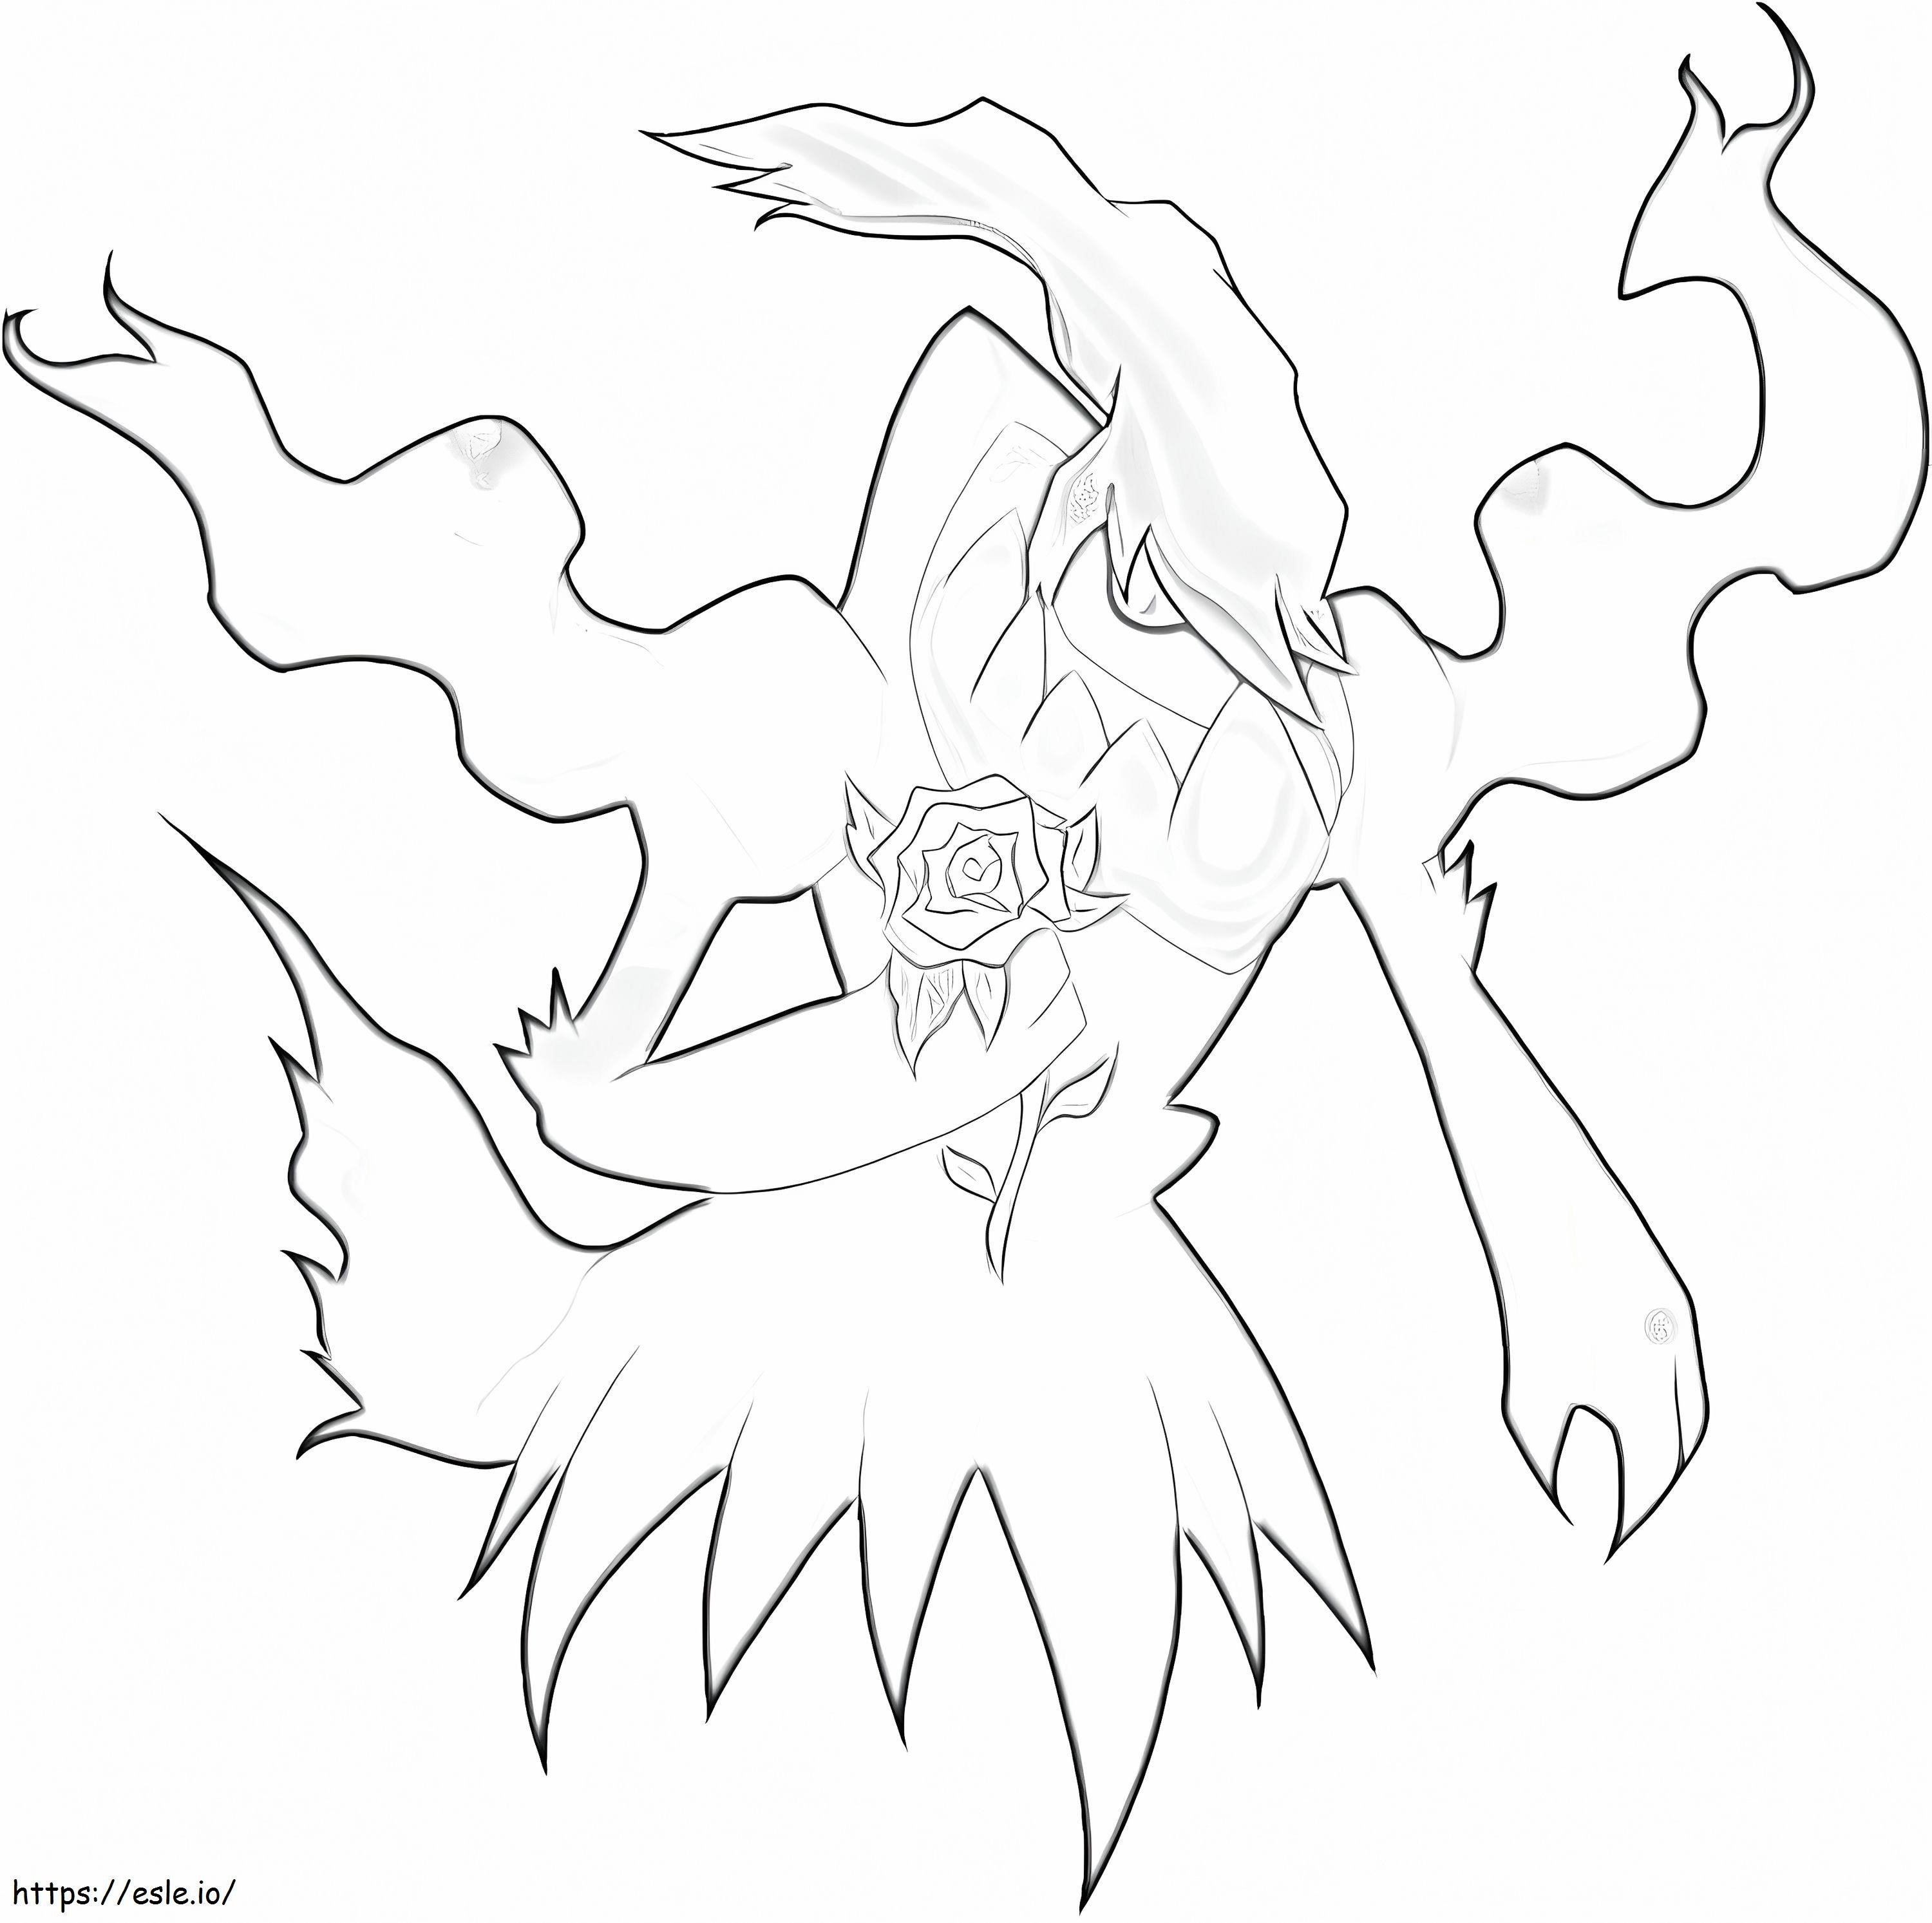 Darkrai With Rose coloring page